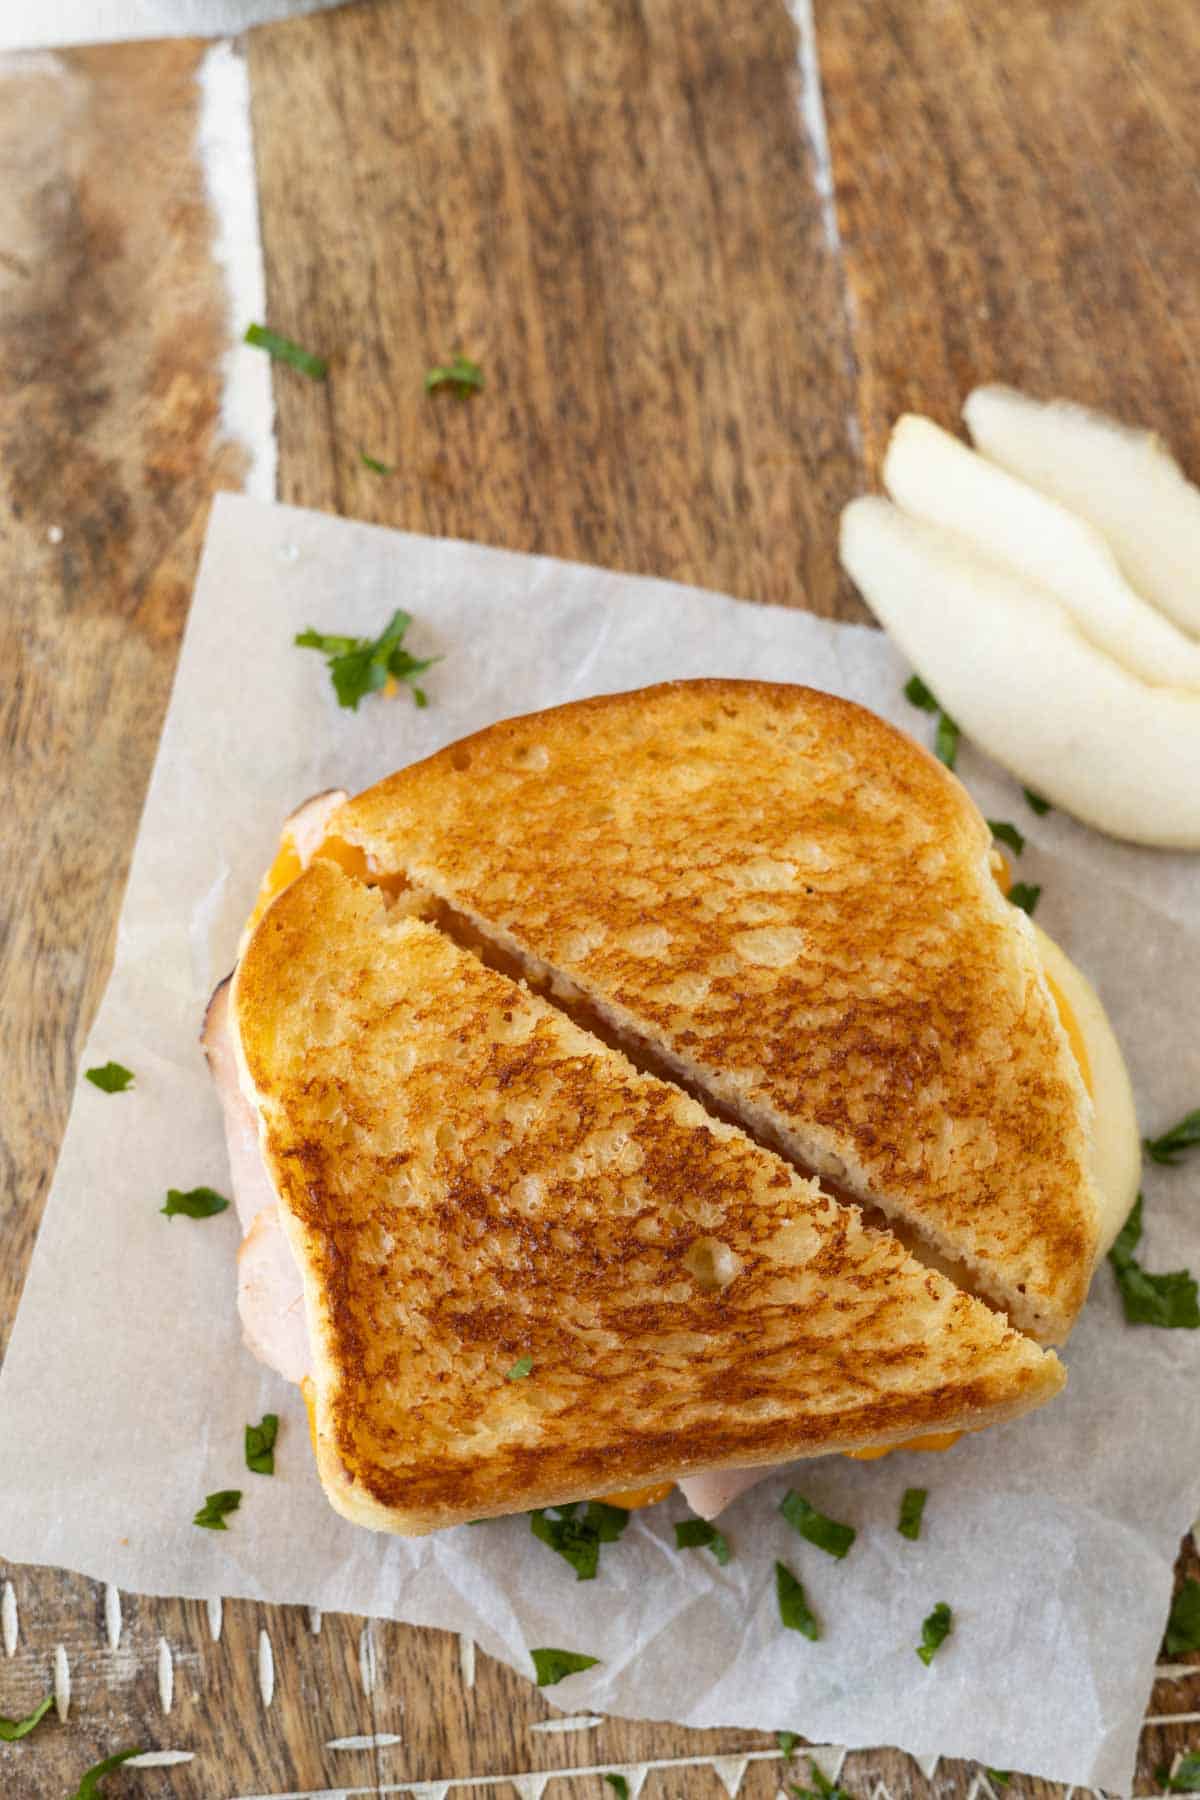 A toasted grilled cheese sandwich cut in half with sliced pears on a wooden cutting board.